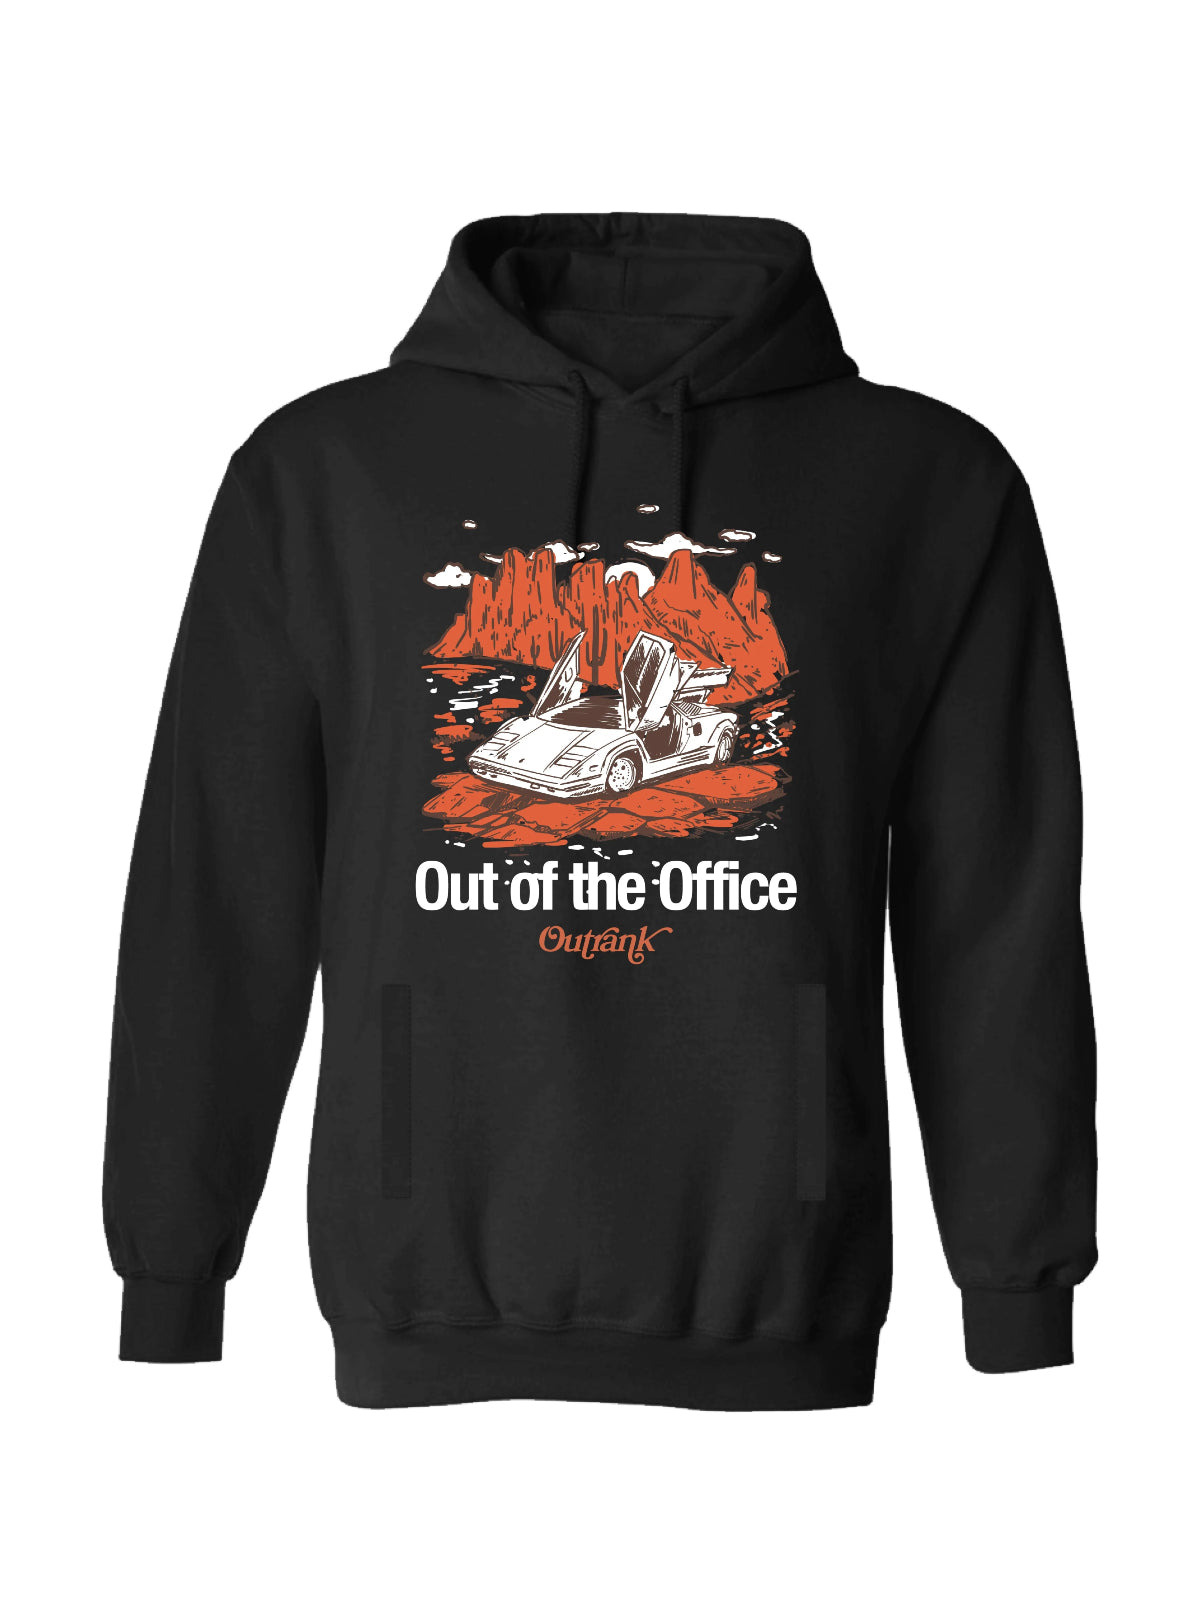 Outrank Hoodie - Out Of The Office - Black - OR2139H